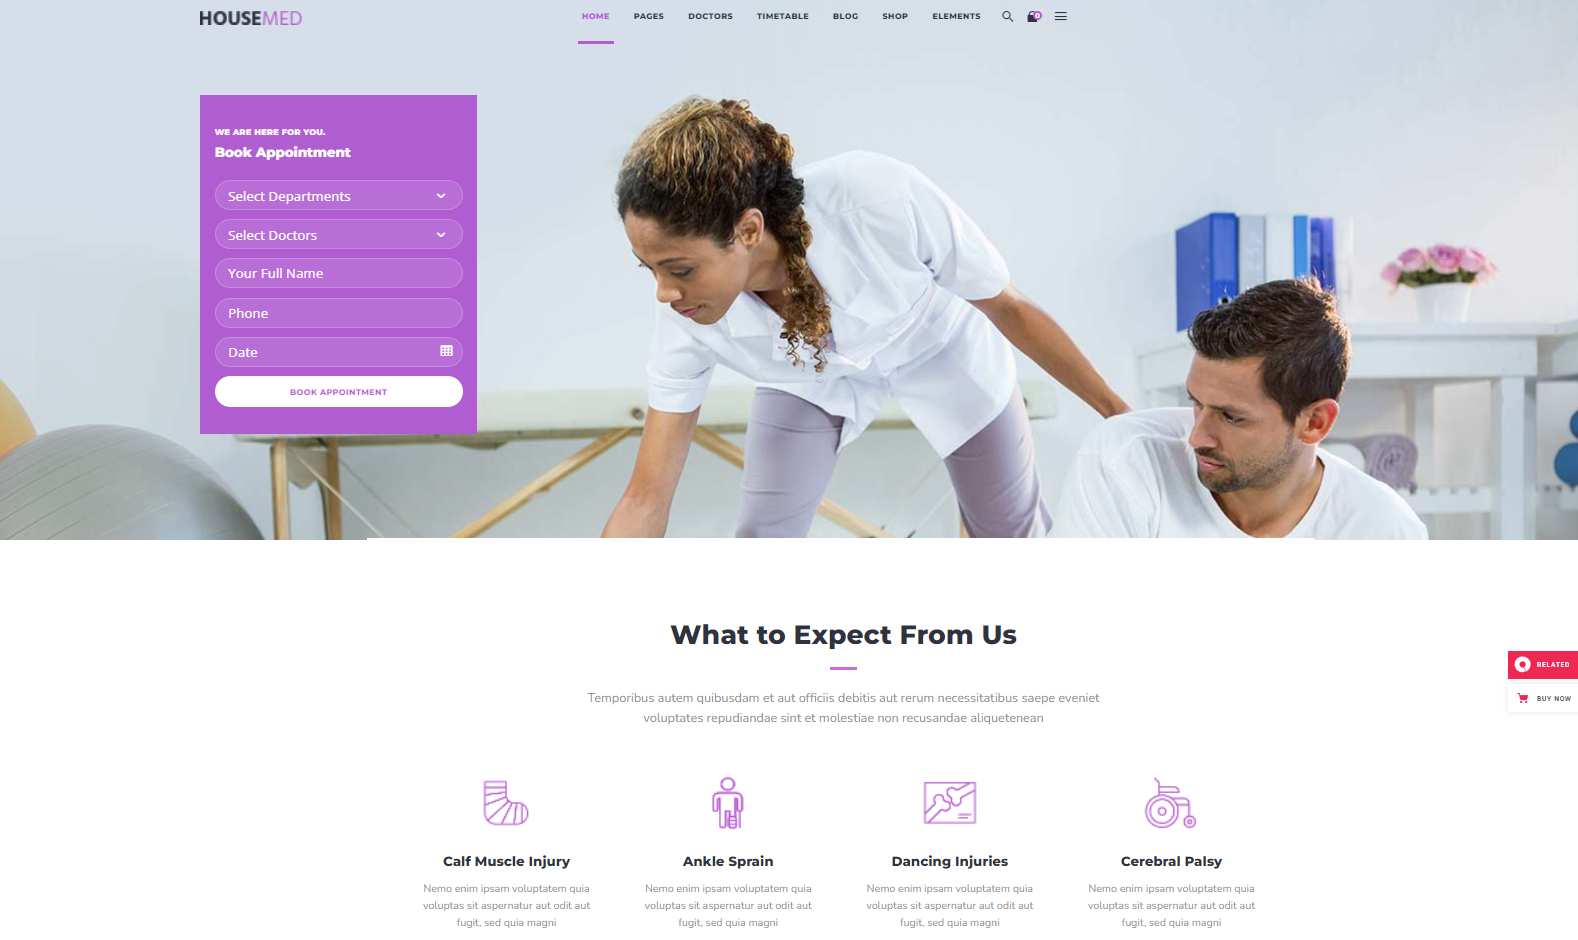 Physical therapy website template named HouseMed